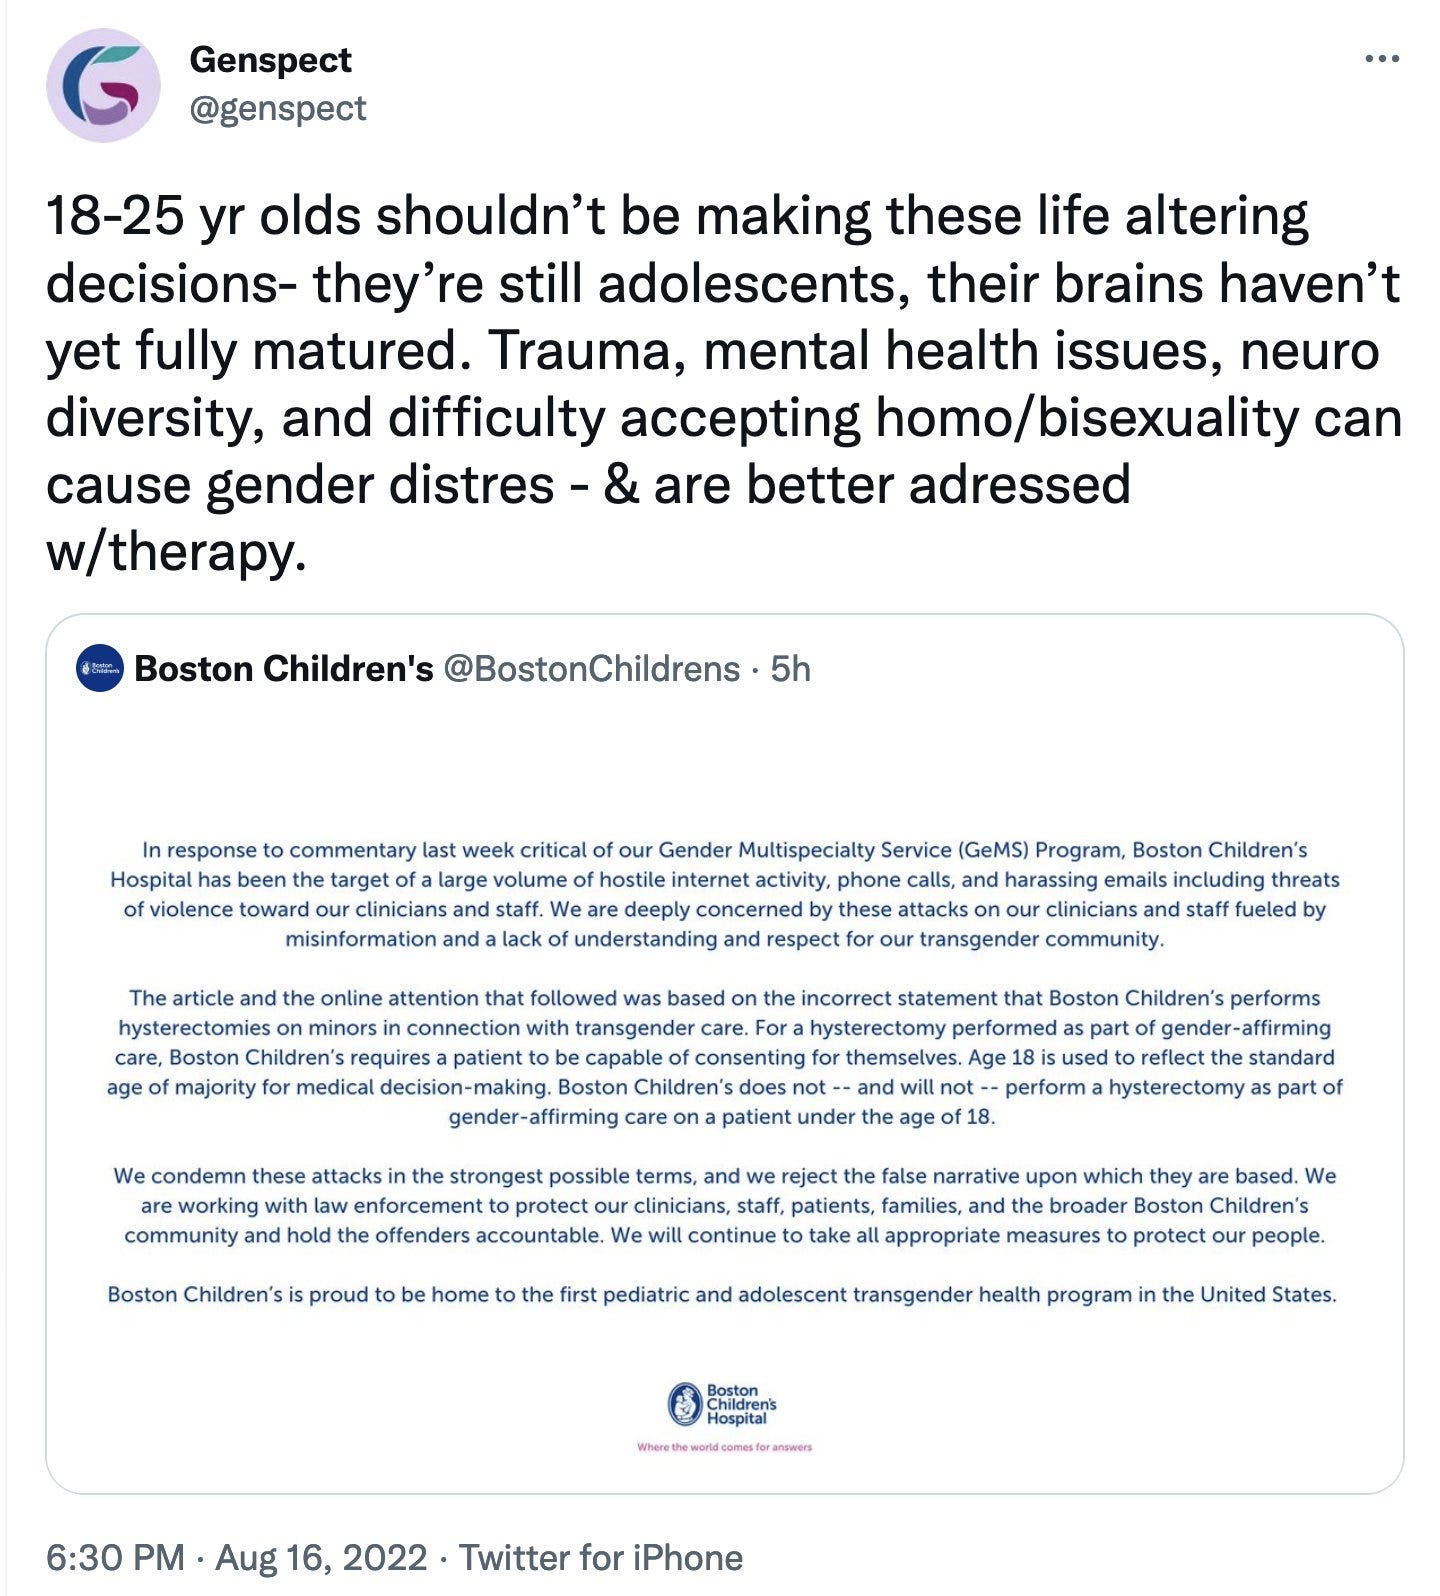 tweet from @genspect that reads: "18-25 yr olds shouldn’t be making these life altering decisions- they’re still adolescents, their brains haven’t yet fully matured. Trauma, mental health issues, neuro diversity, and difficulty accepting homo/bisexuality can cause gender distres - & are better adressed w/therapy."